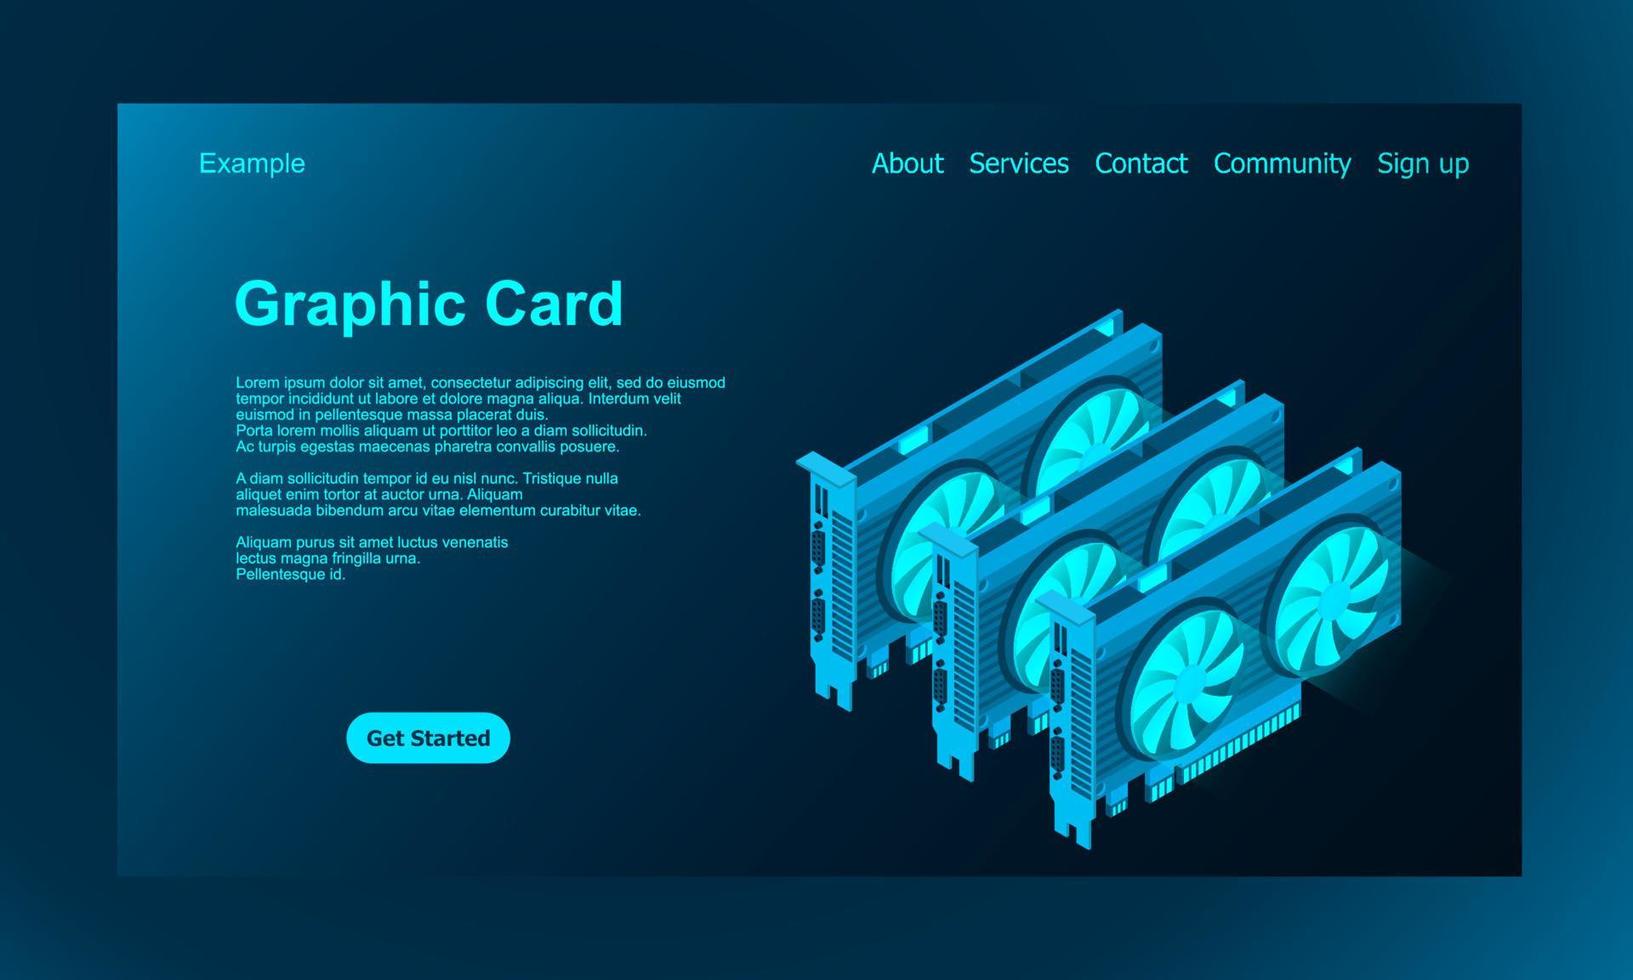 3d isometric video graphic card. Video Graphics Card for cryptocurrency mining or gaming. Personal computer hardware components. GPU Graphic card illustration vector